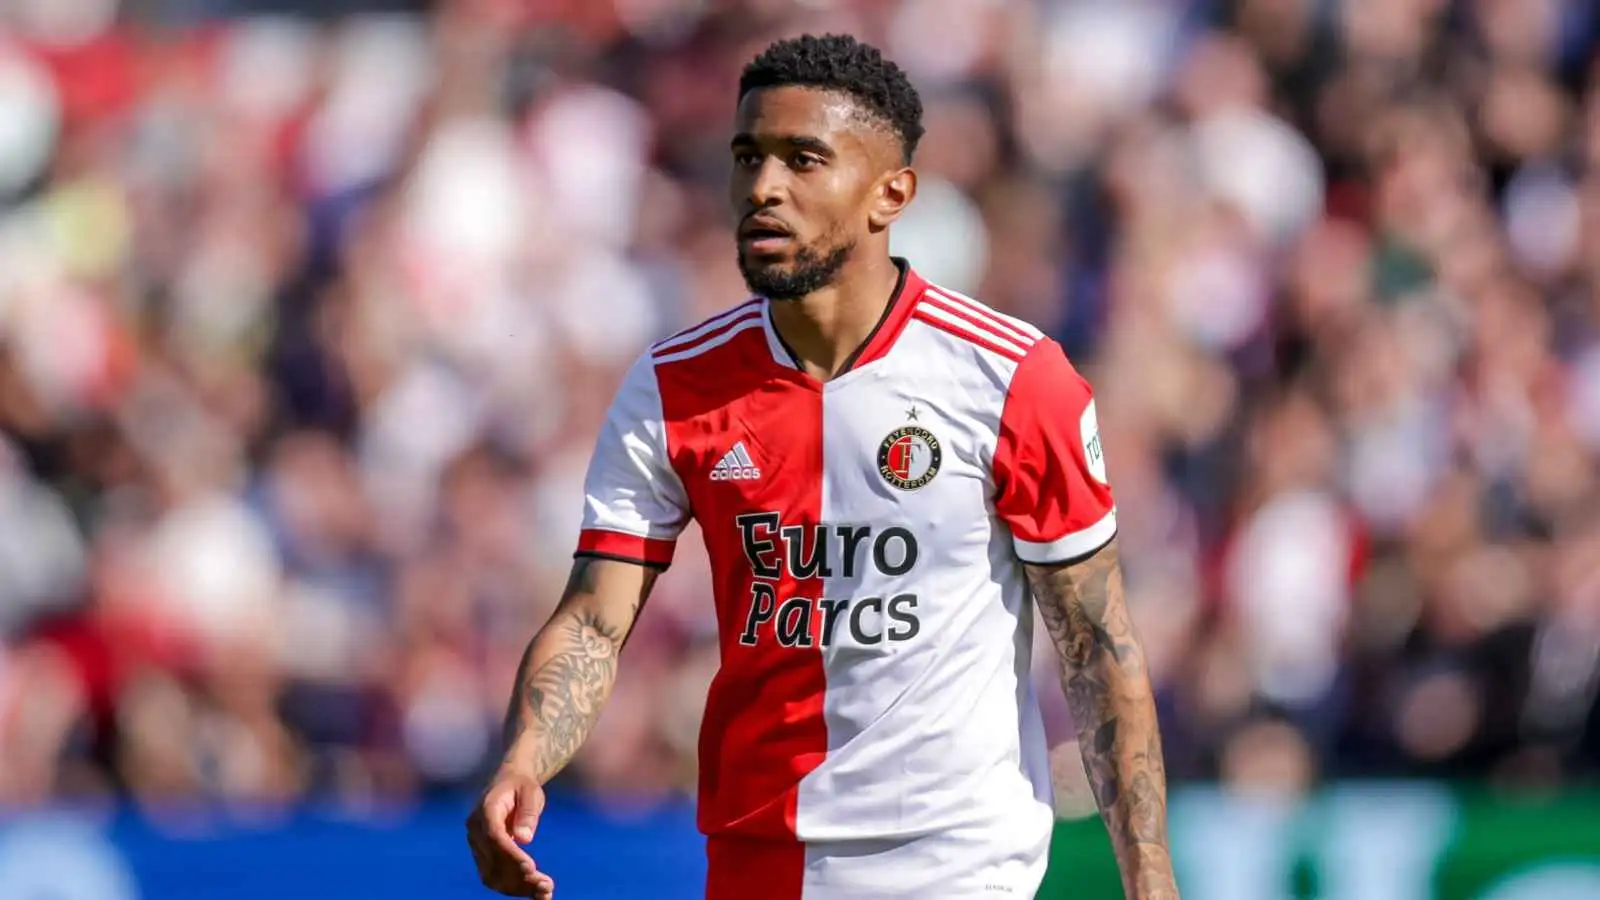 Reiss Nelson during a Feyenoord match